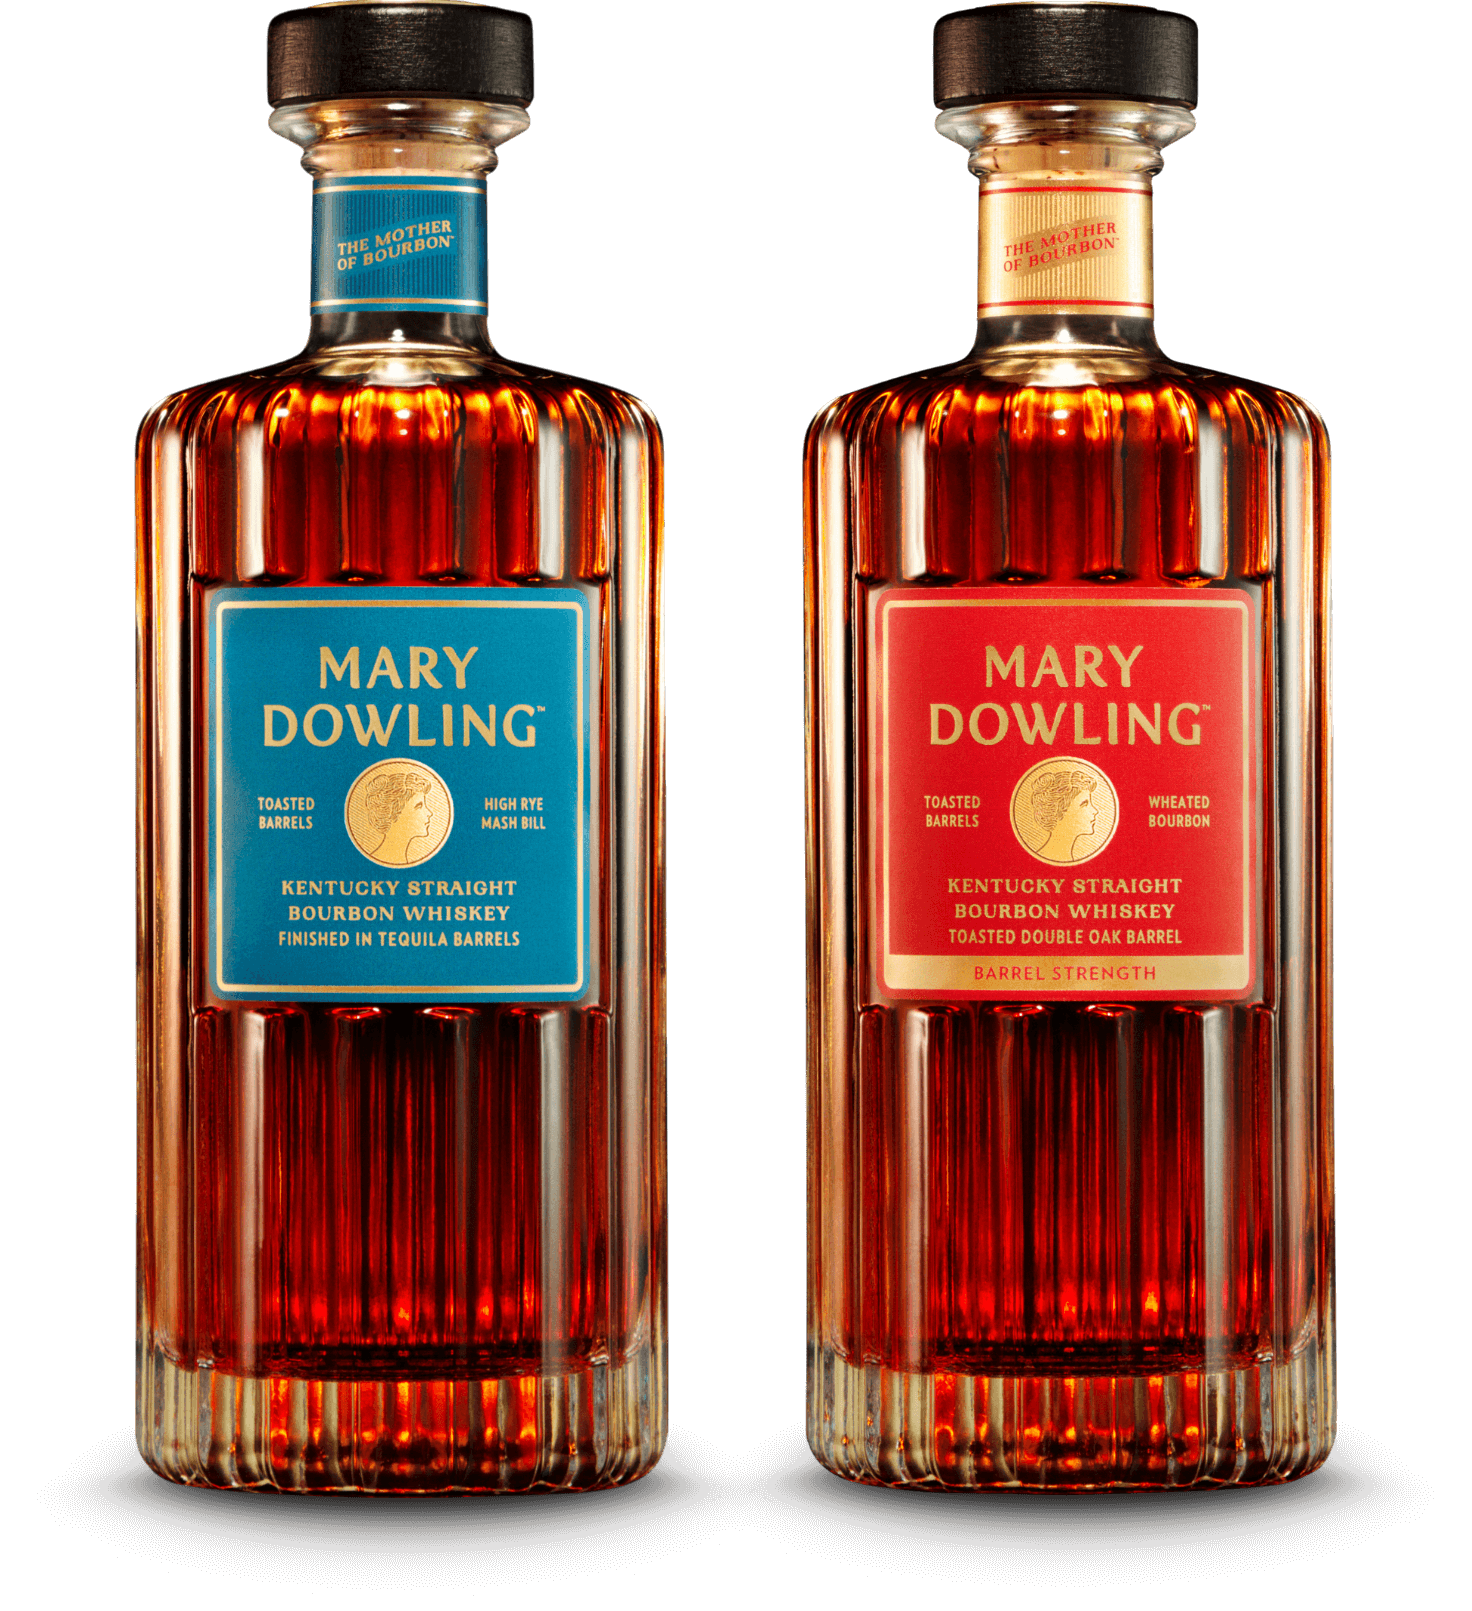 Mary Dowling Whiskey Company Launches with Two Unique Finished Bourbons